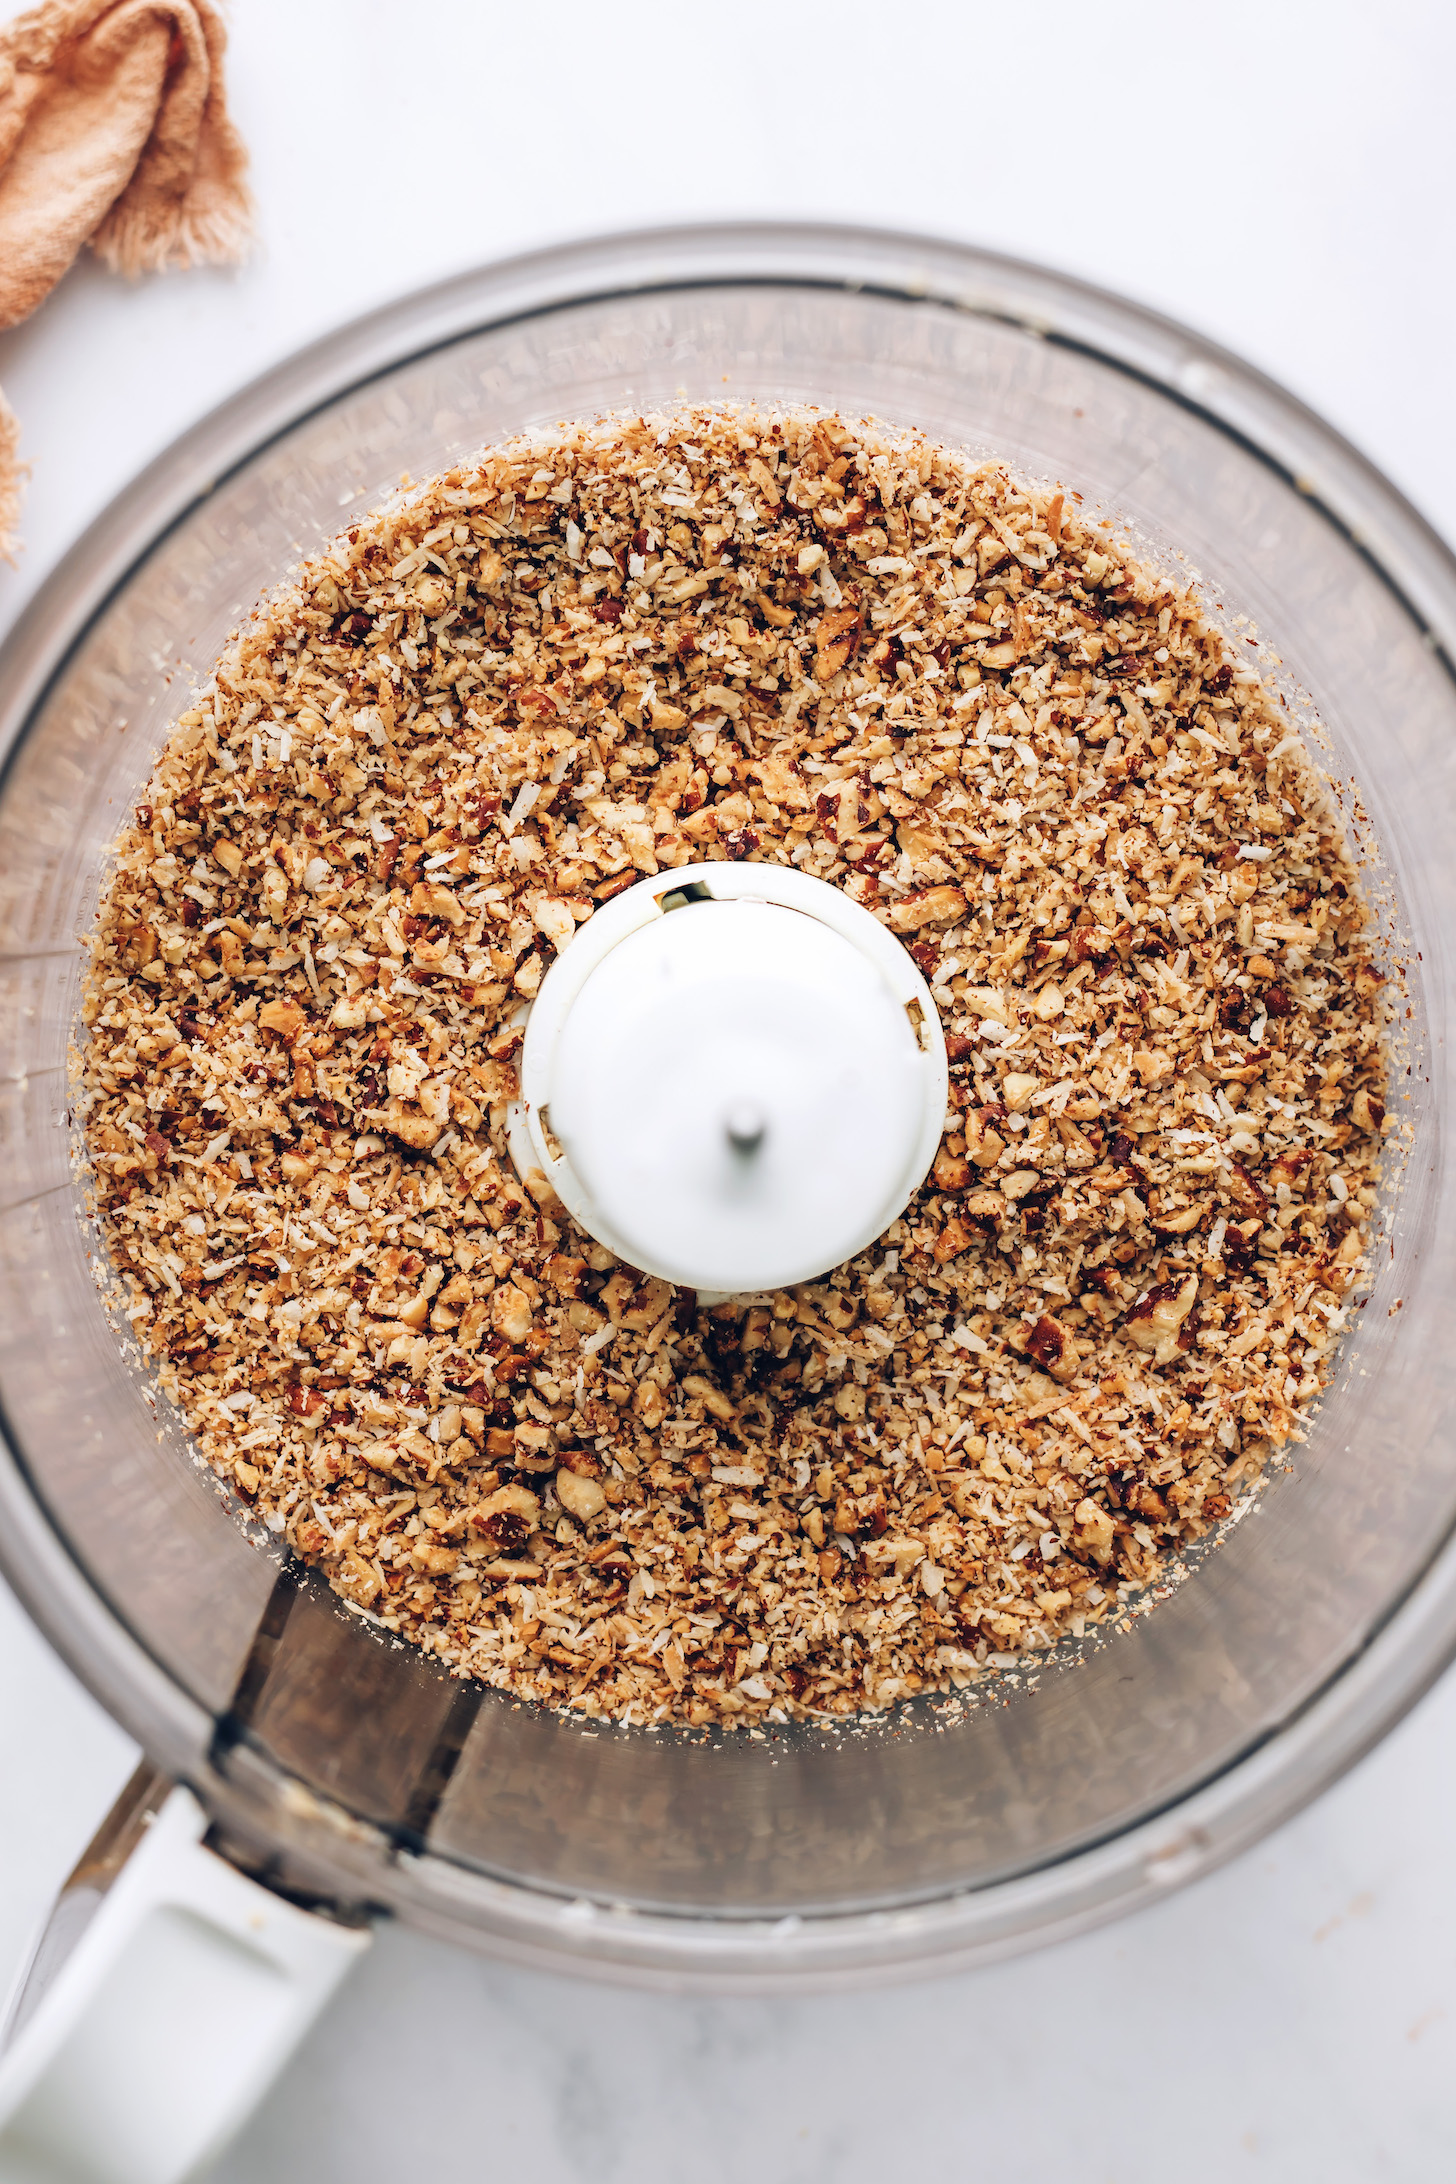 Toasted pecans and coconut in a food processor